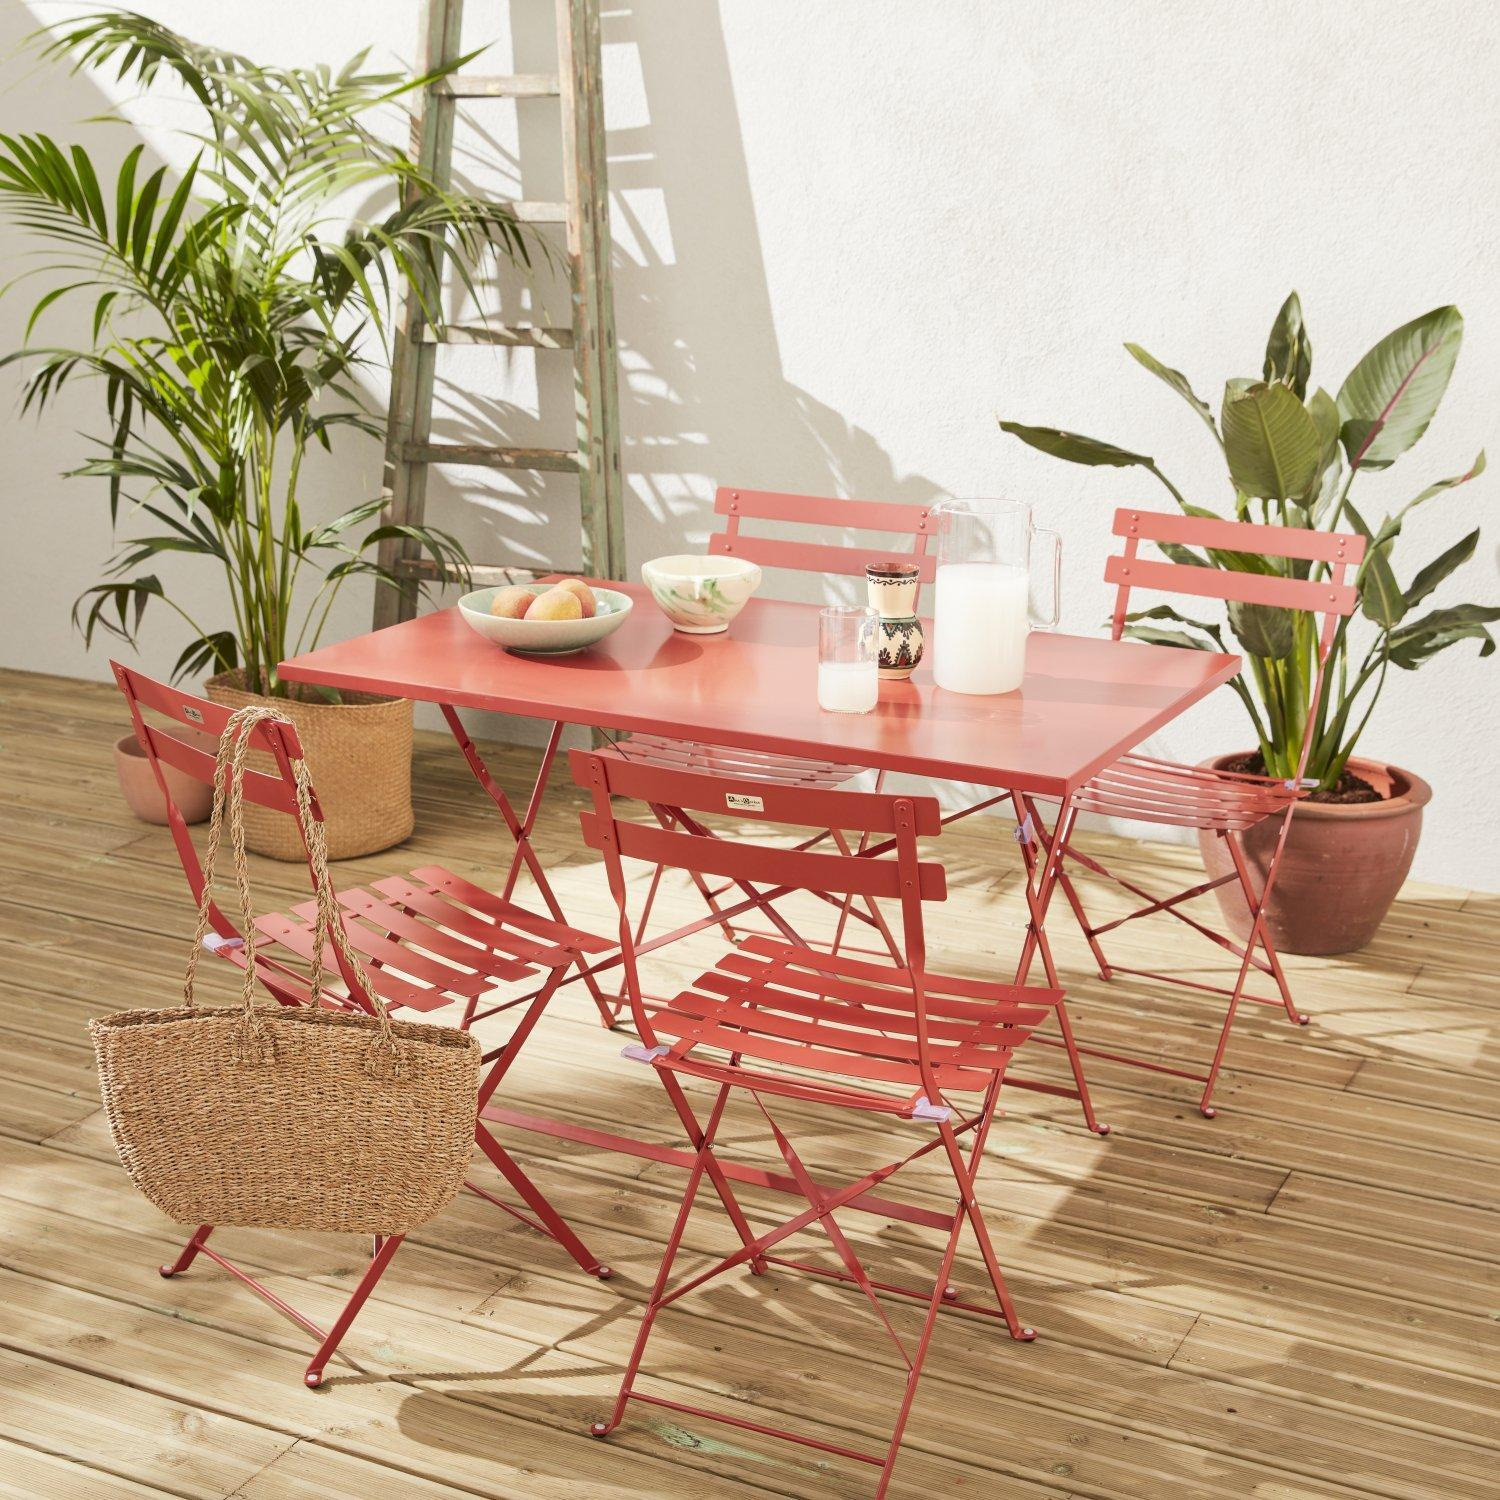 4-seater Foldable Thermo-lacquered Steel Bistro Garden Table With Chai - image 1